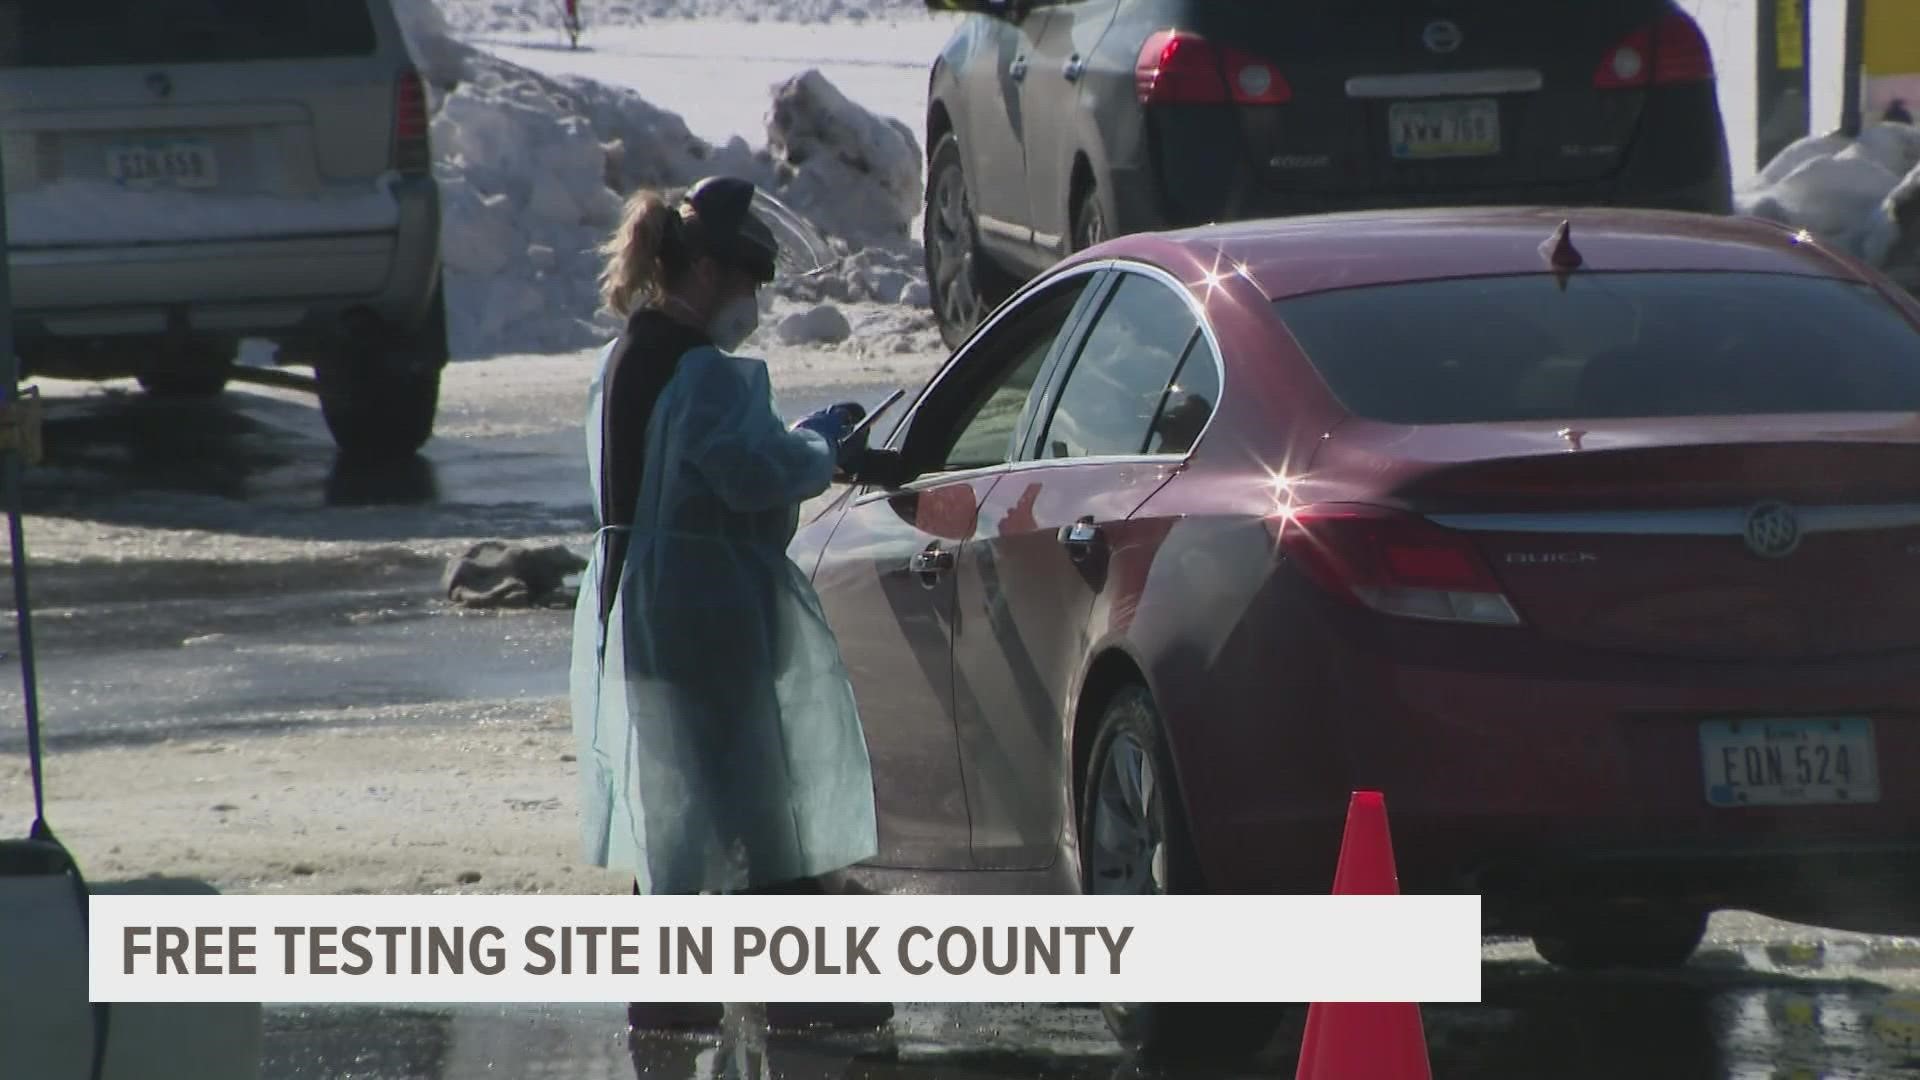 Polk County Supervisor Angela Connolly said two more testing sites will open later this week or early next week.